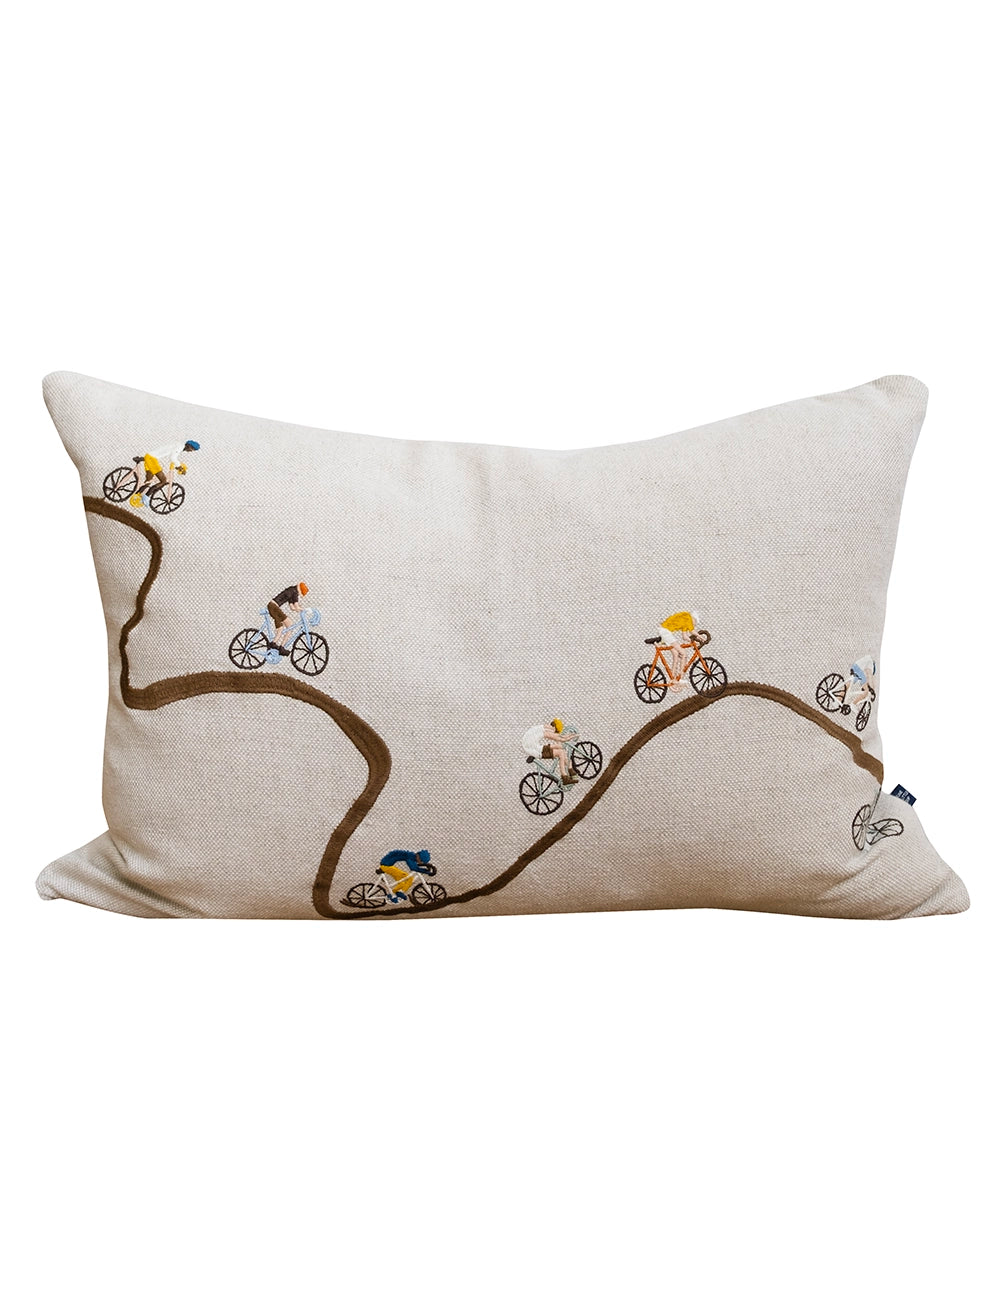 Bikers Embroidered Cushion COVER